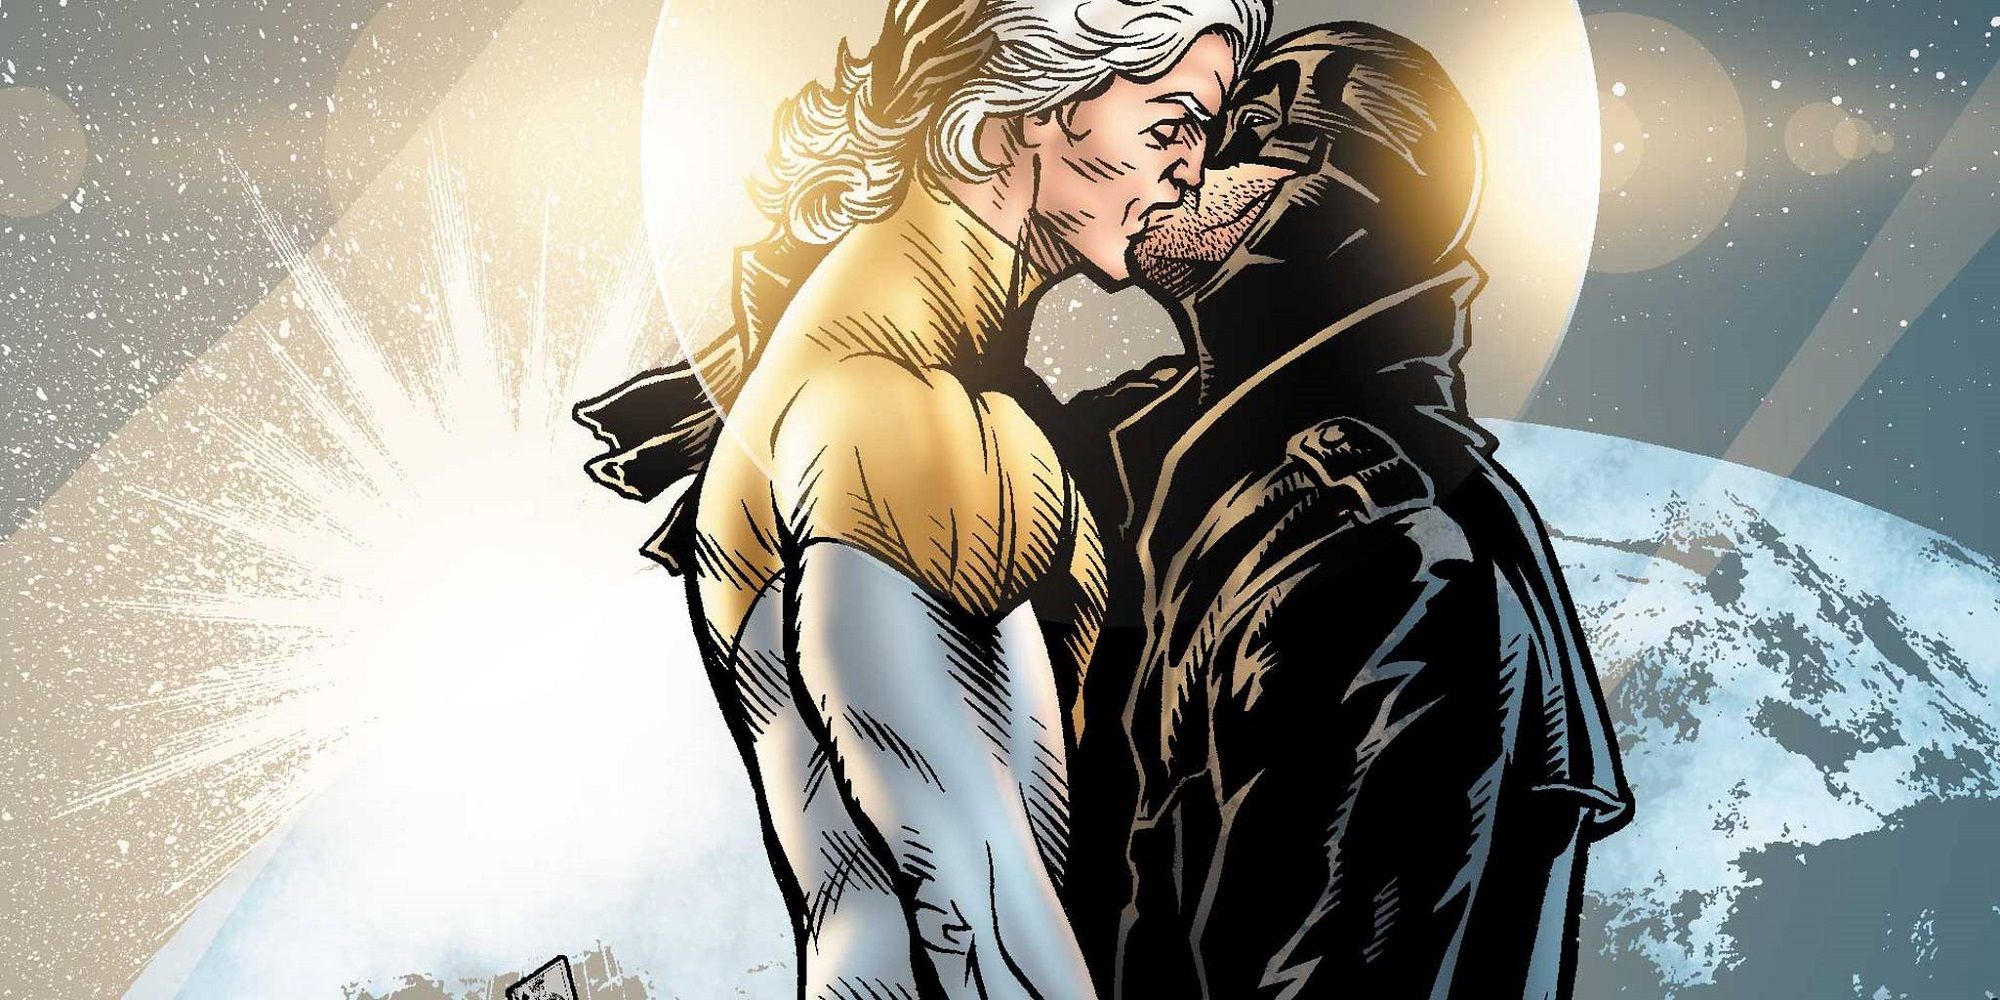 Apollo and Midnighter kiss in space from Image Comics